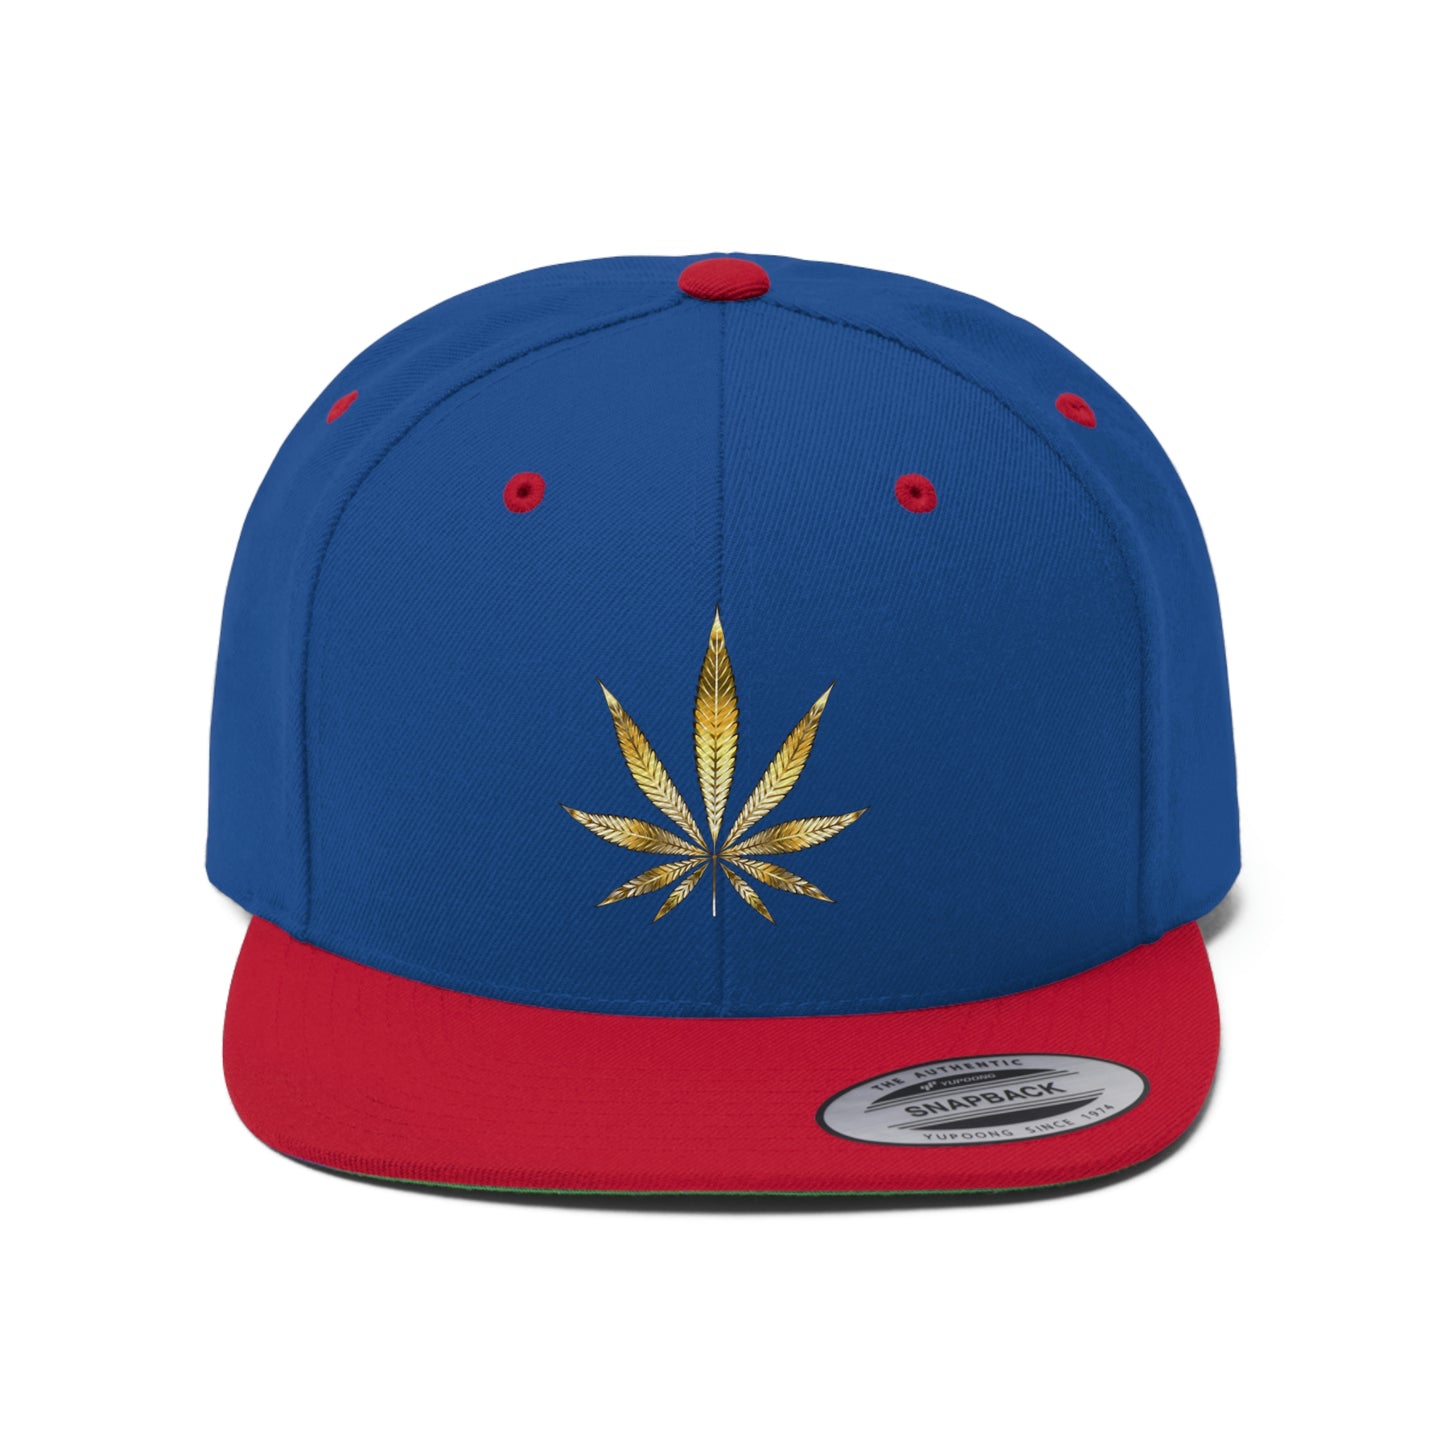 A close up picture of the red and blue Gold Marijuana Leaf Snapback Hat